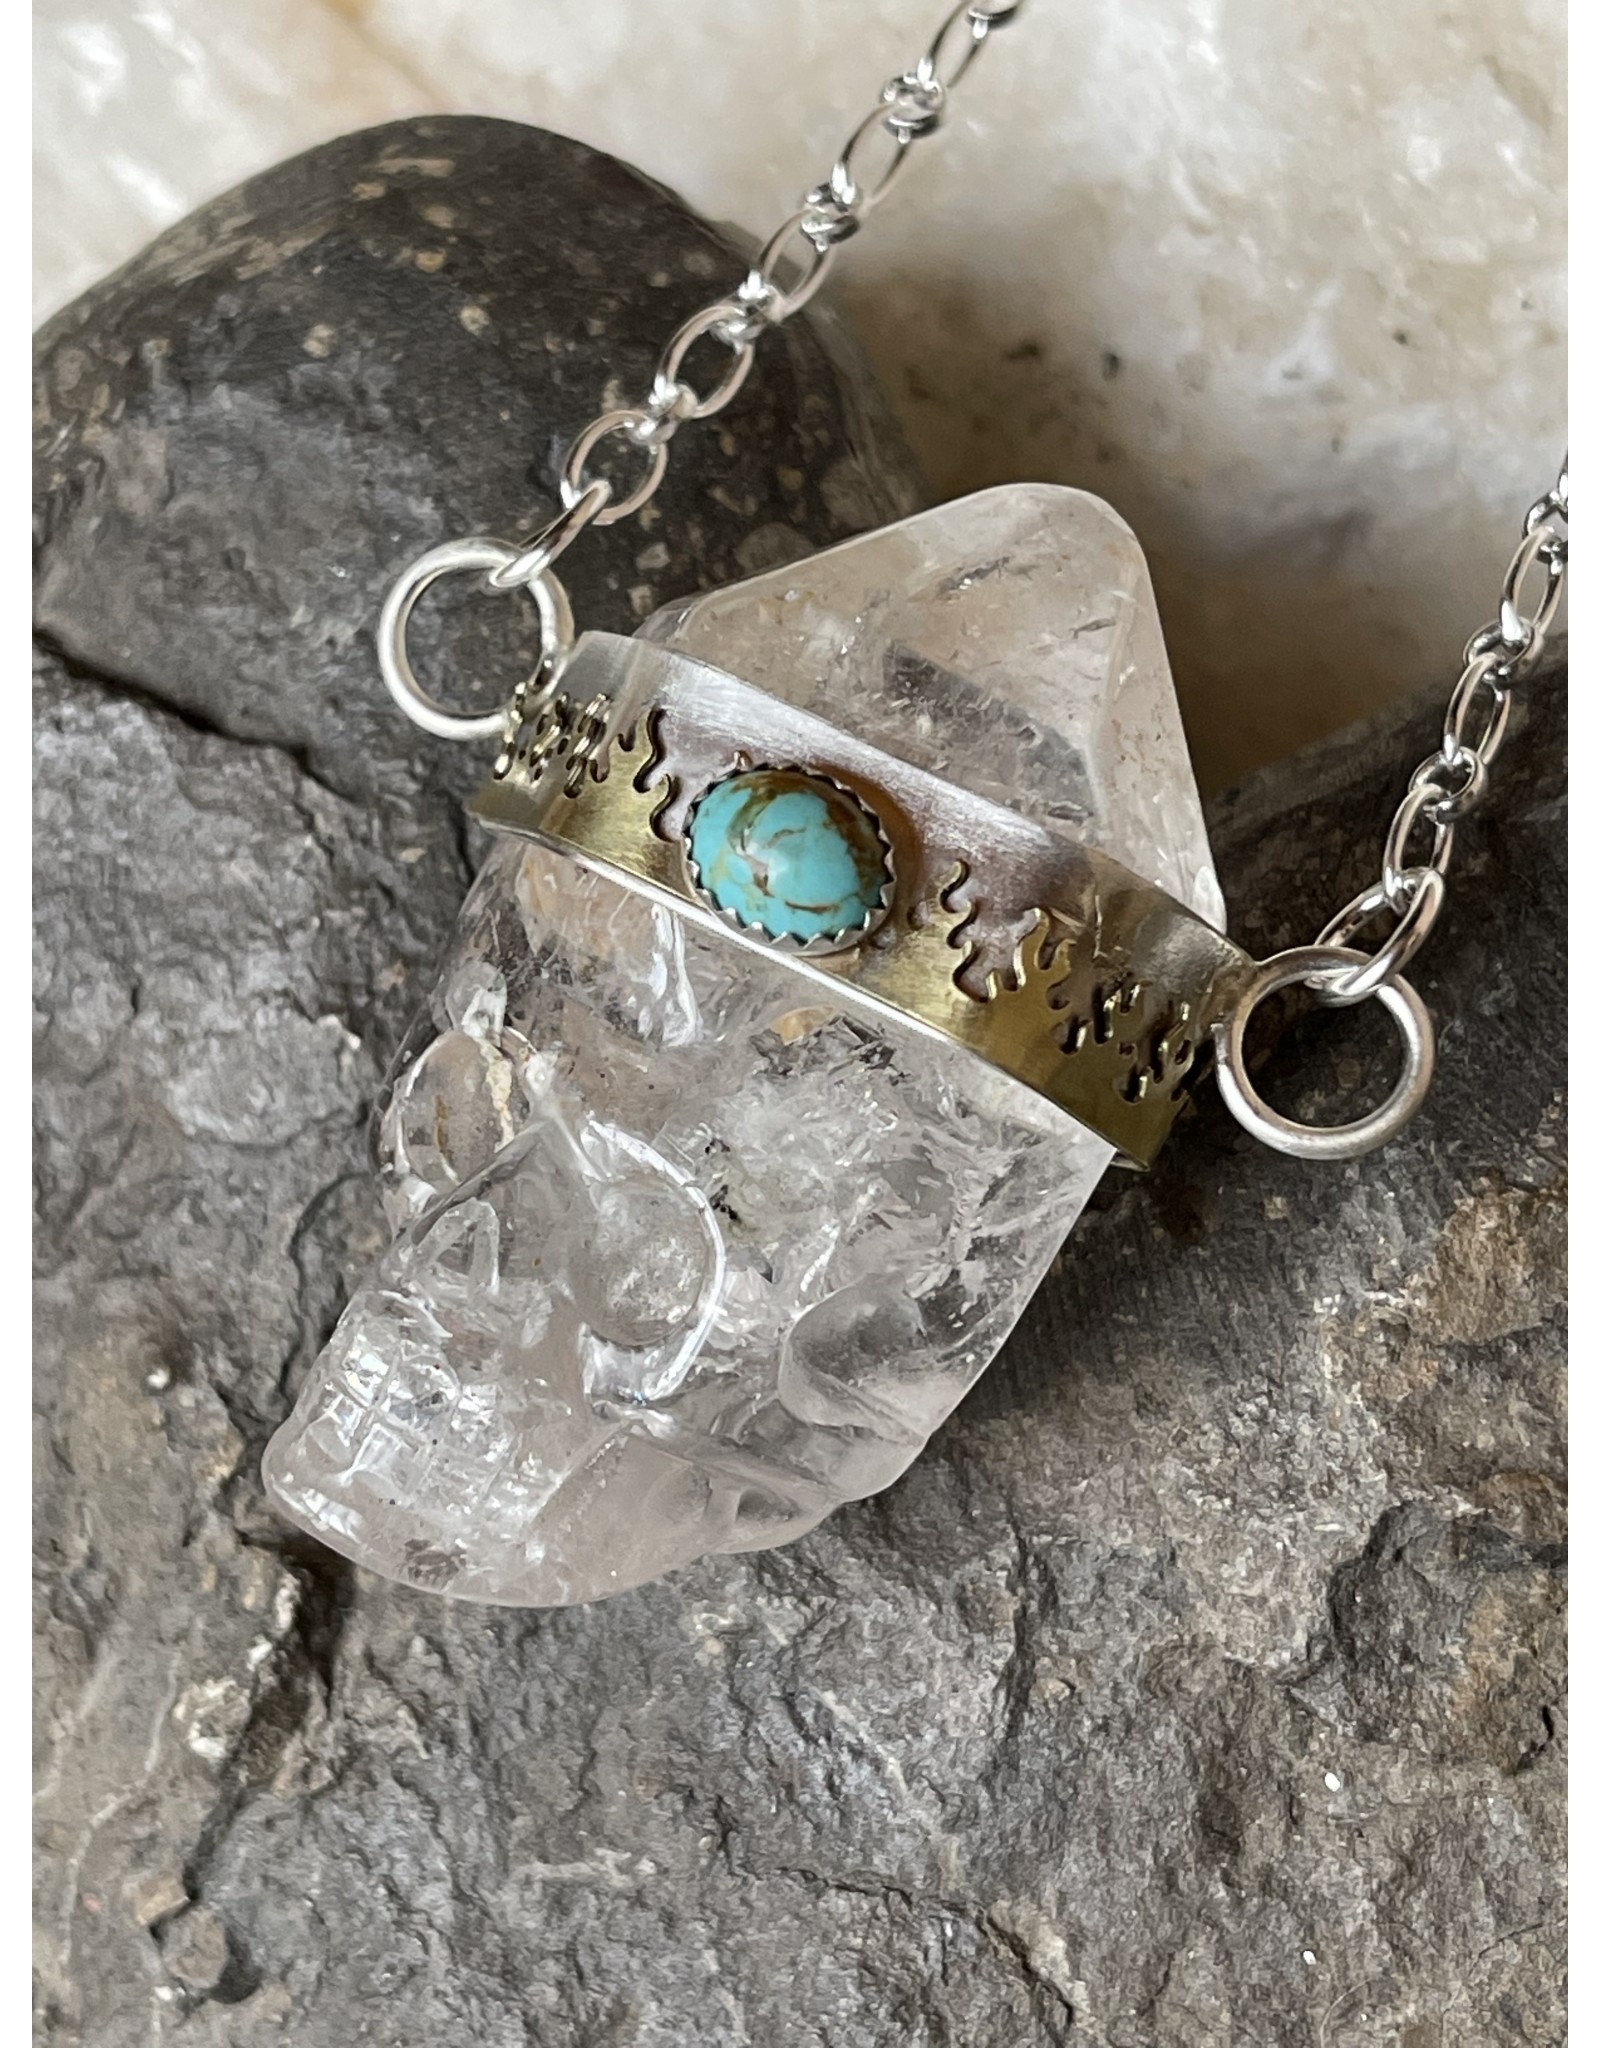 Annette Colby - Jeweler Quartz Crystal Skull Necklace Turquoise  Fire Bezel by Annette Colby